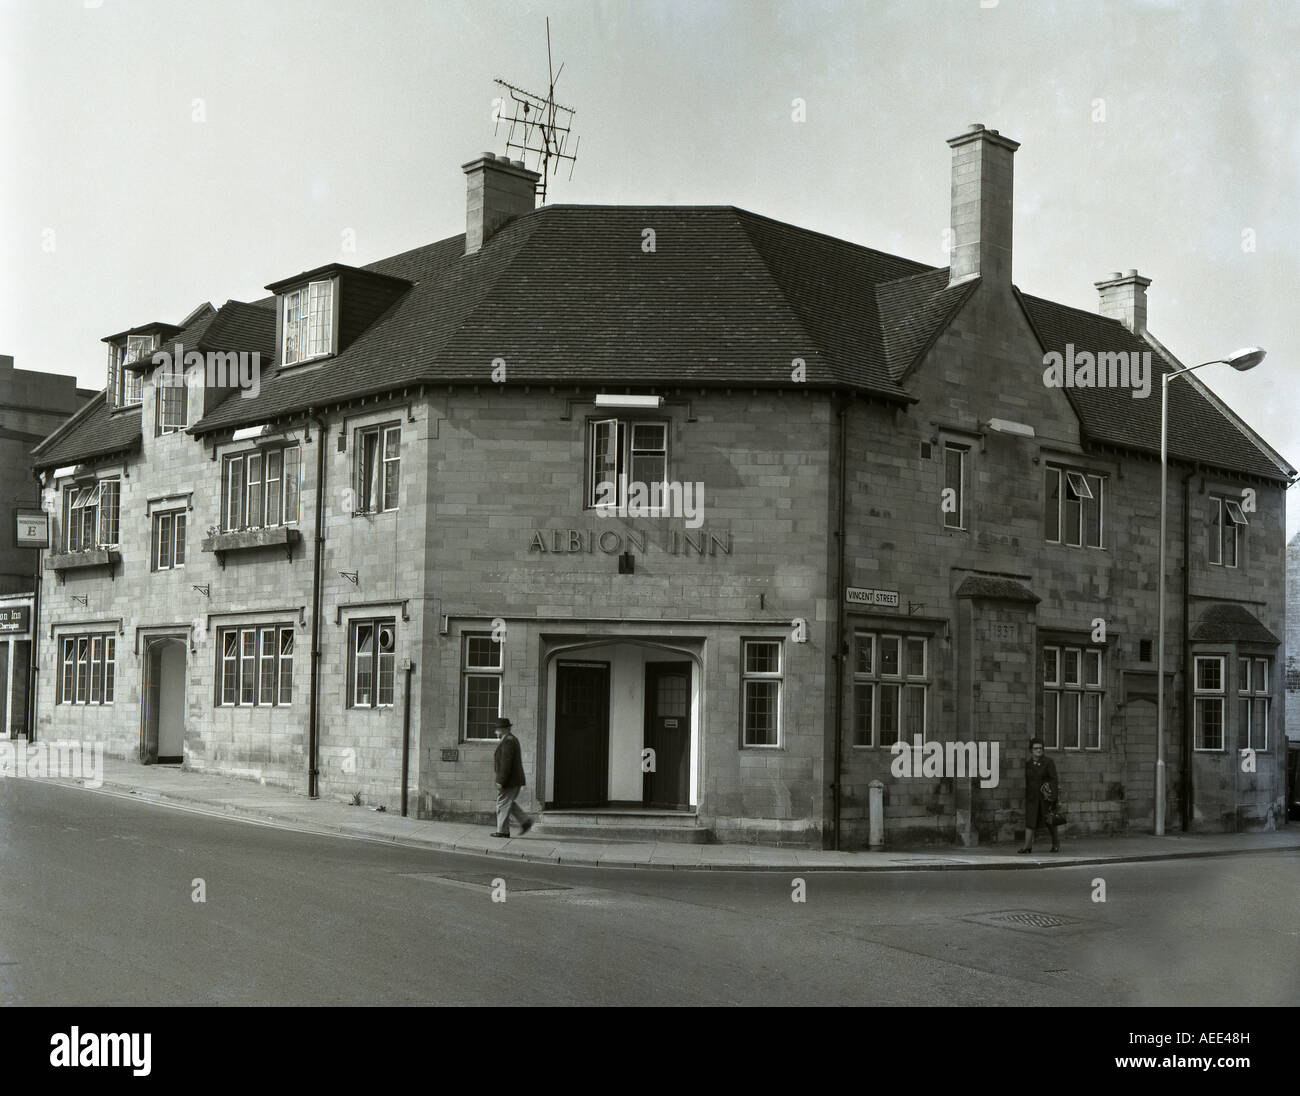 Albion Inn public house, vincent street, yeovil  in 1974 somerset england number 0083 Stock Photo